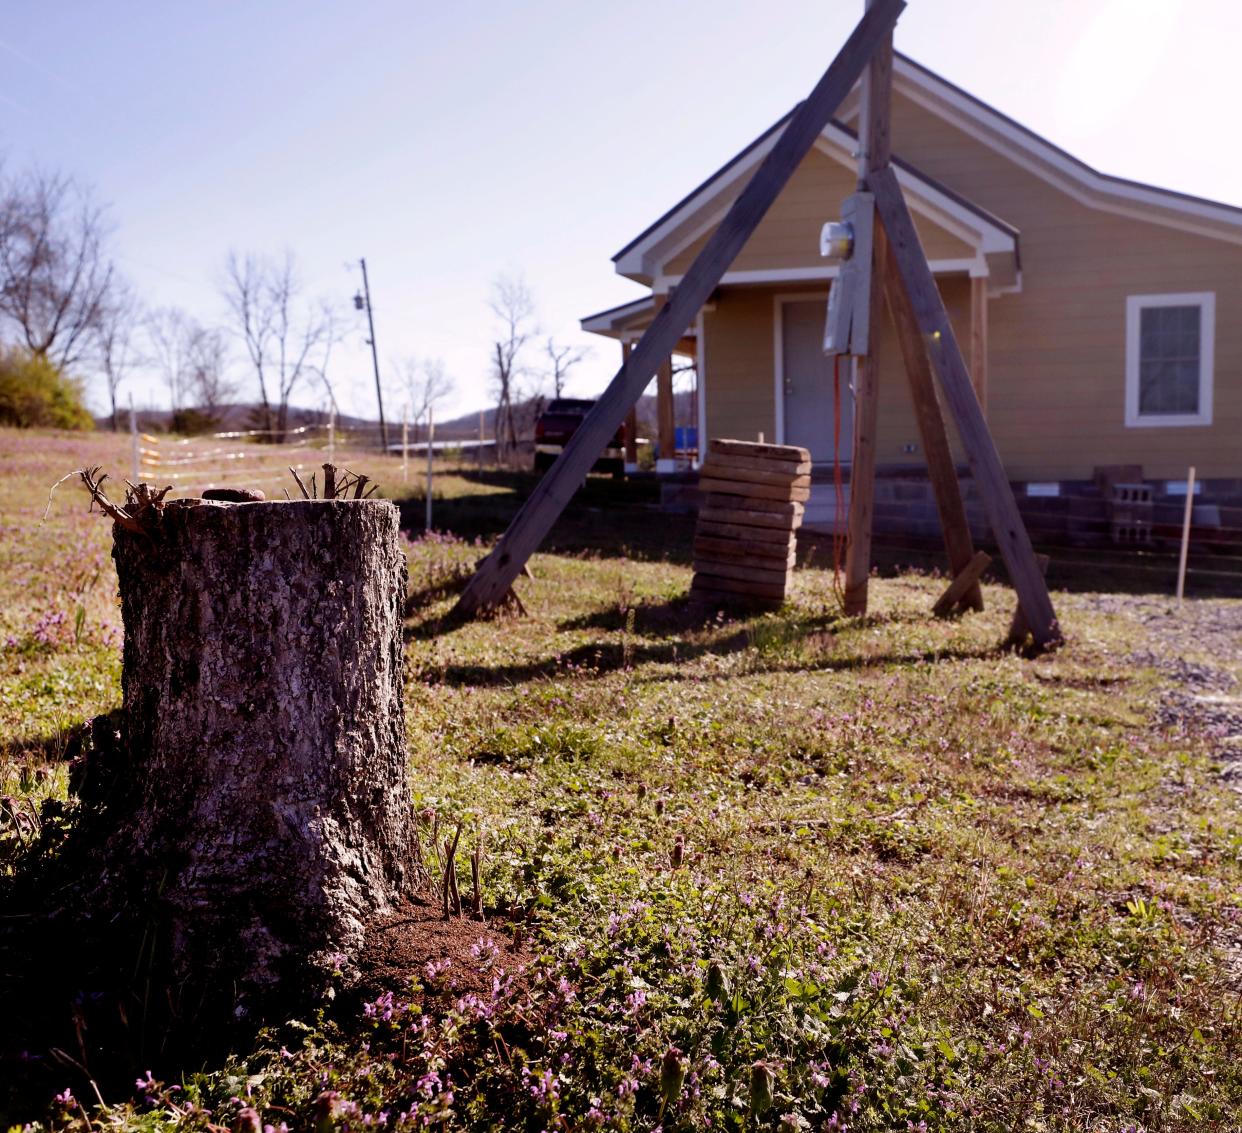 The stump of the hackberry tree where James and Sonia PittsÕ RV came to a rest after being destroyed in a tornado in Readyville, Tenn. almost a year ago. The home that they were building at the time can be seen in the background on Thursday, March 28, 2024, in Readyville, Tenn.